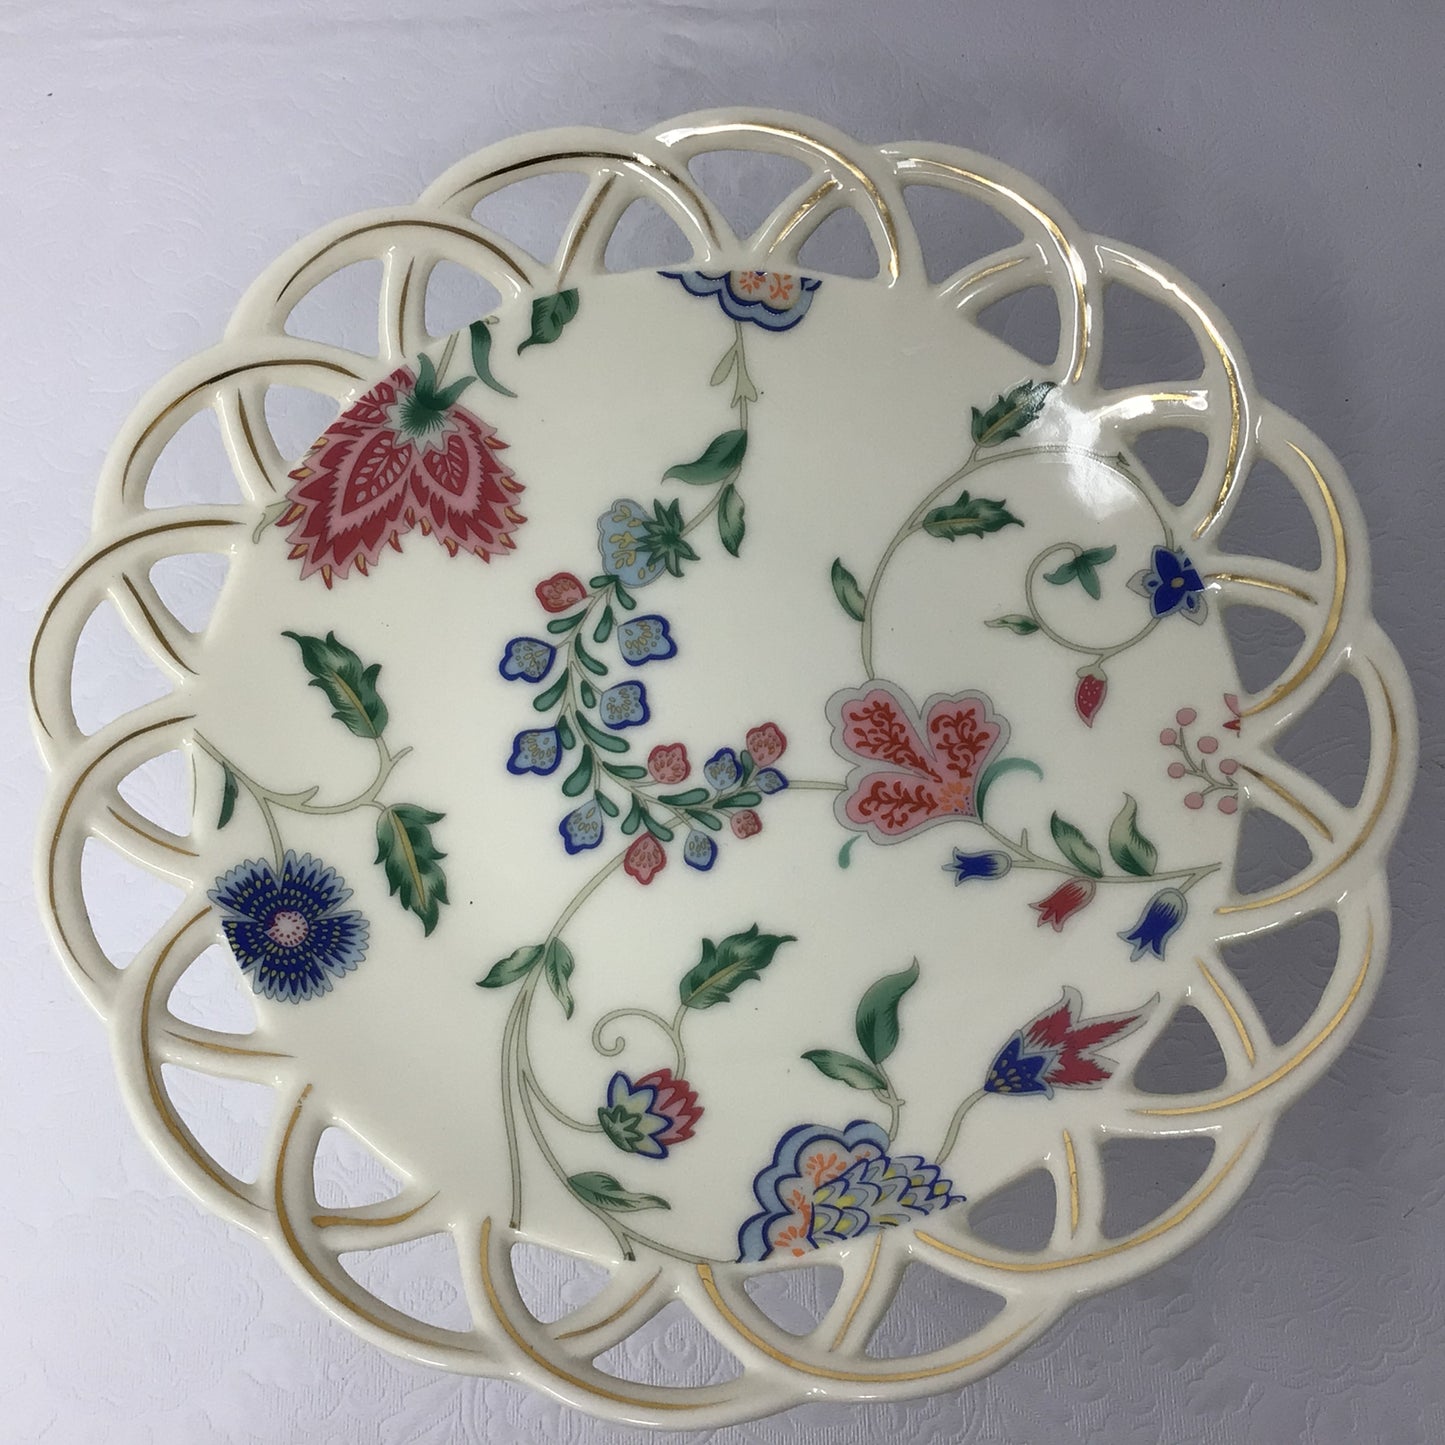 Footed Floral Trinket Dish